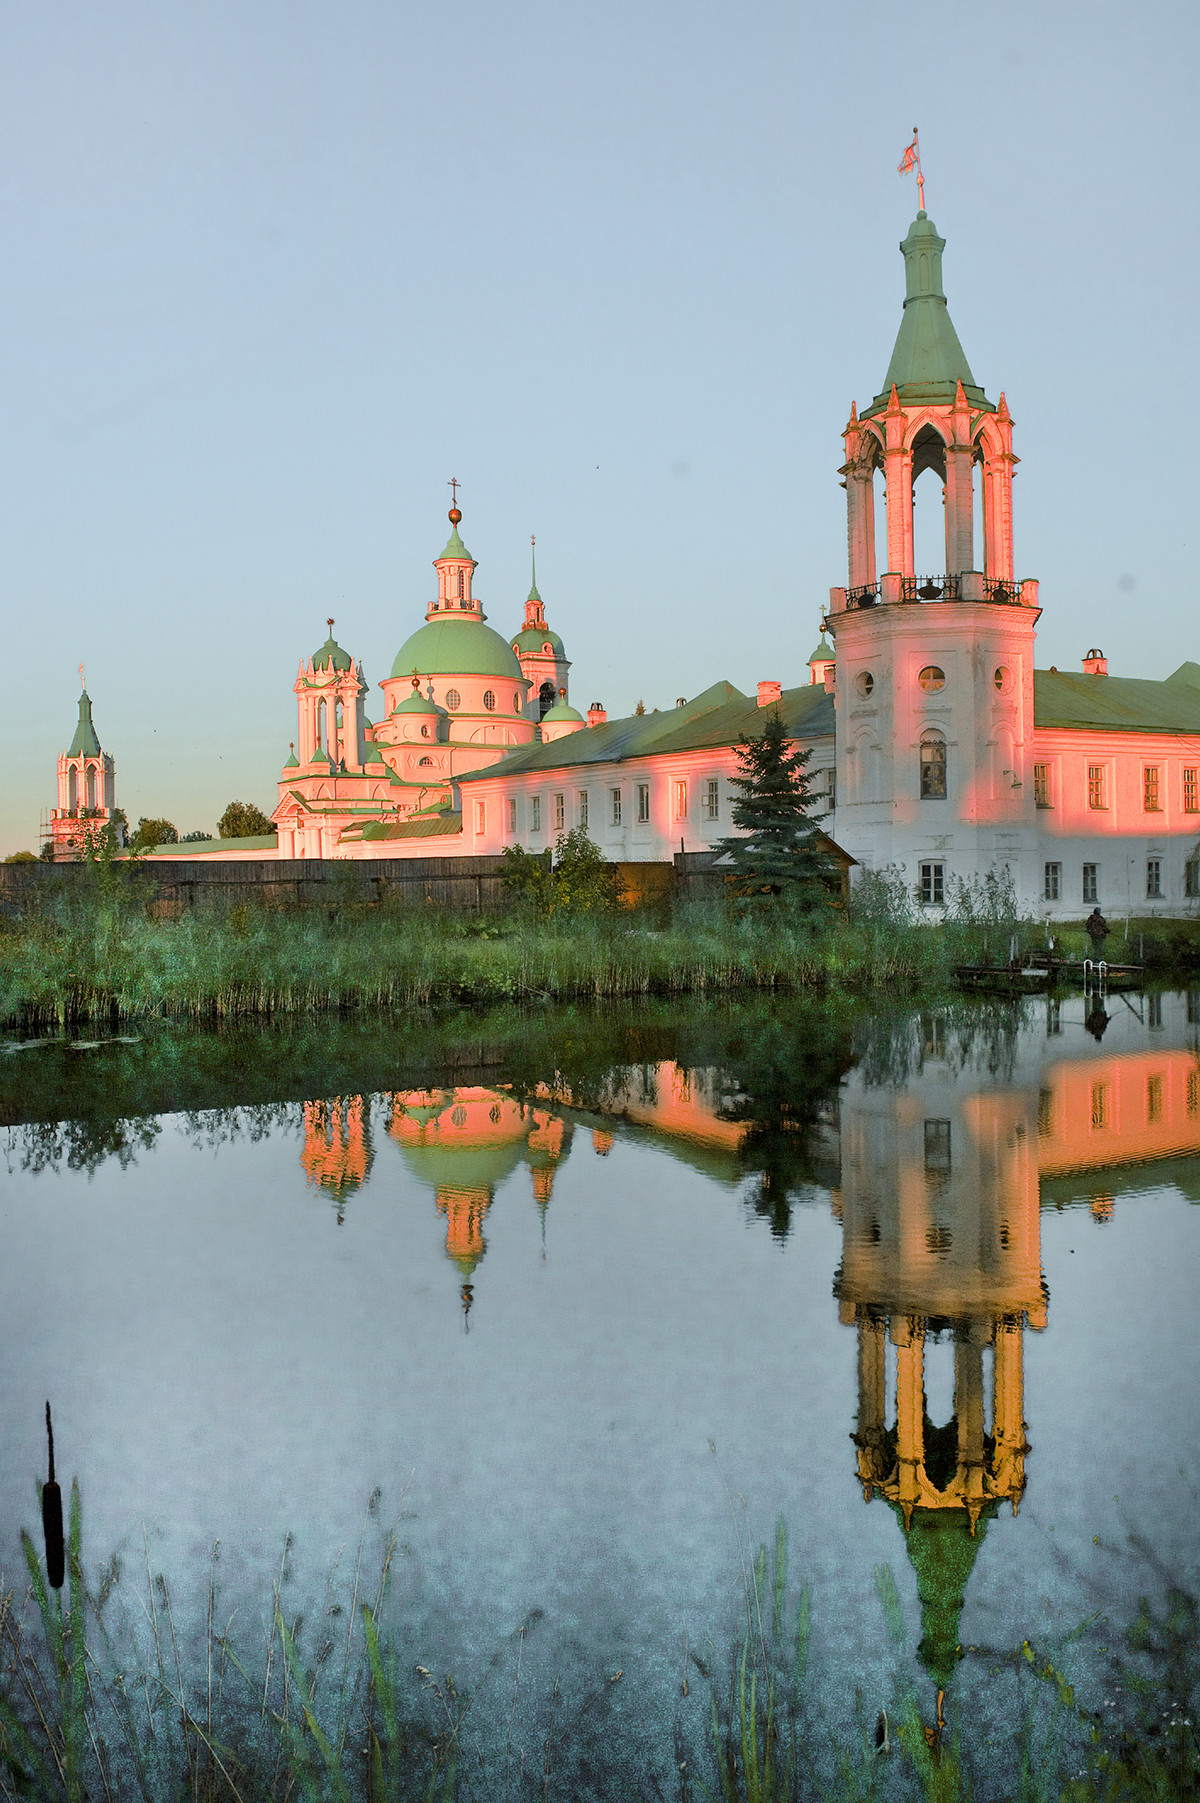 North wall, northwest view across monastery pond.  From left: Northeast corner tower, North Gate, Church of St. Dimitry of Rostov, cloisters & northwest corner tower. July 7, 2019. 